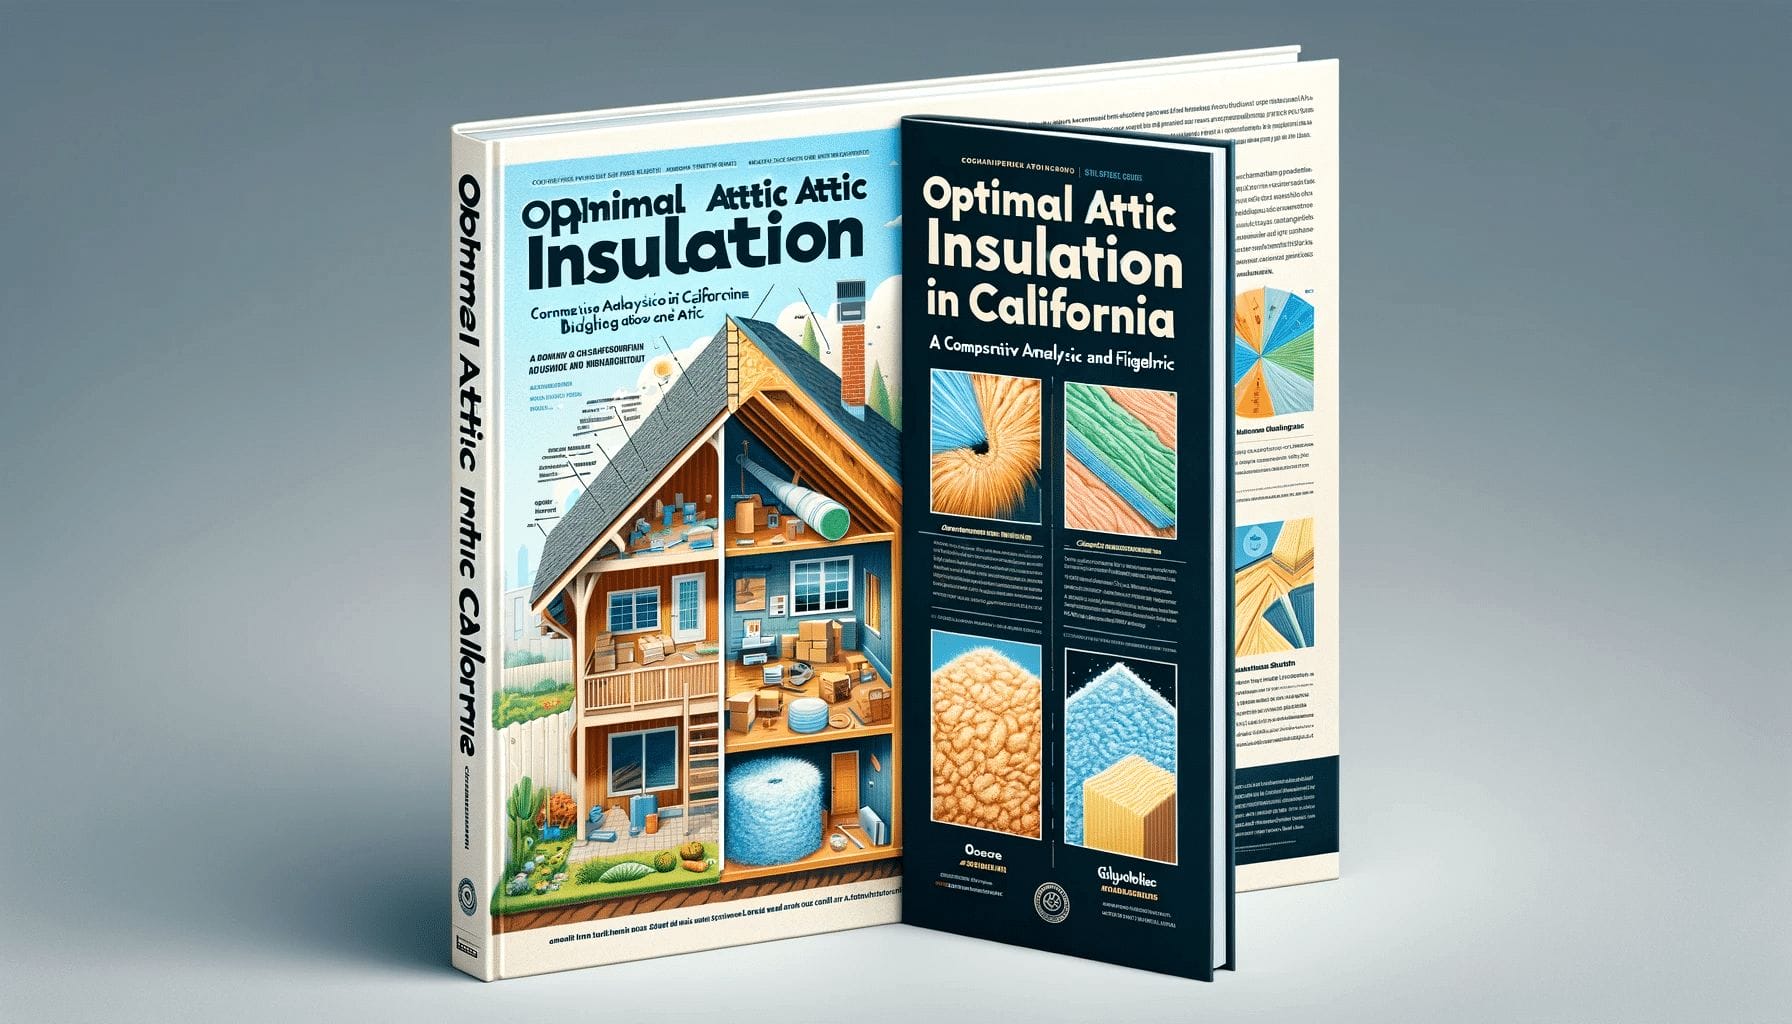 A book with illustrations of a house and insulation.